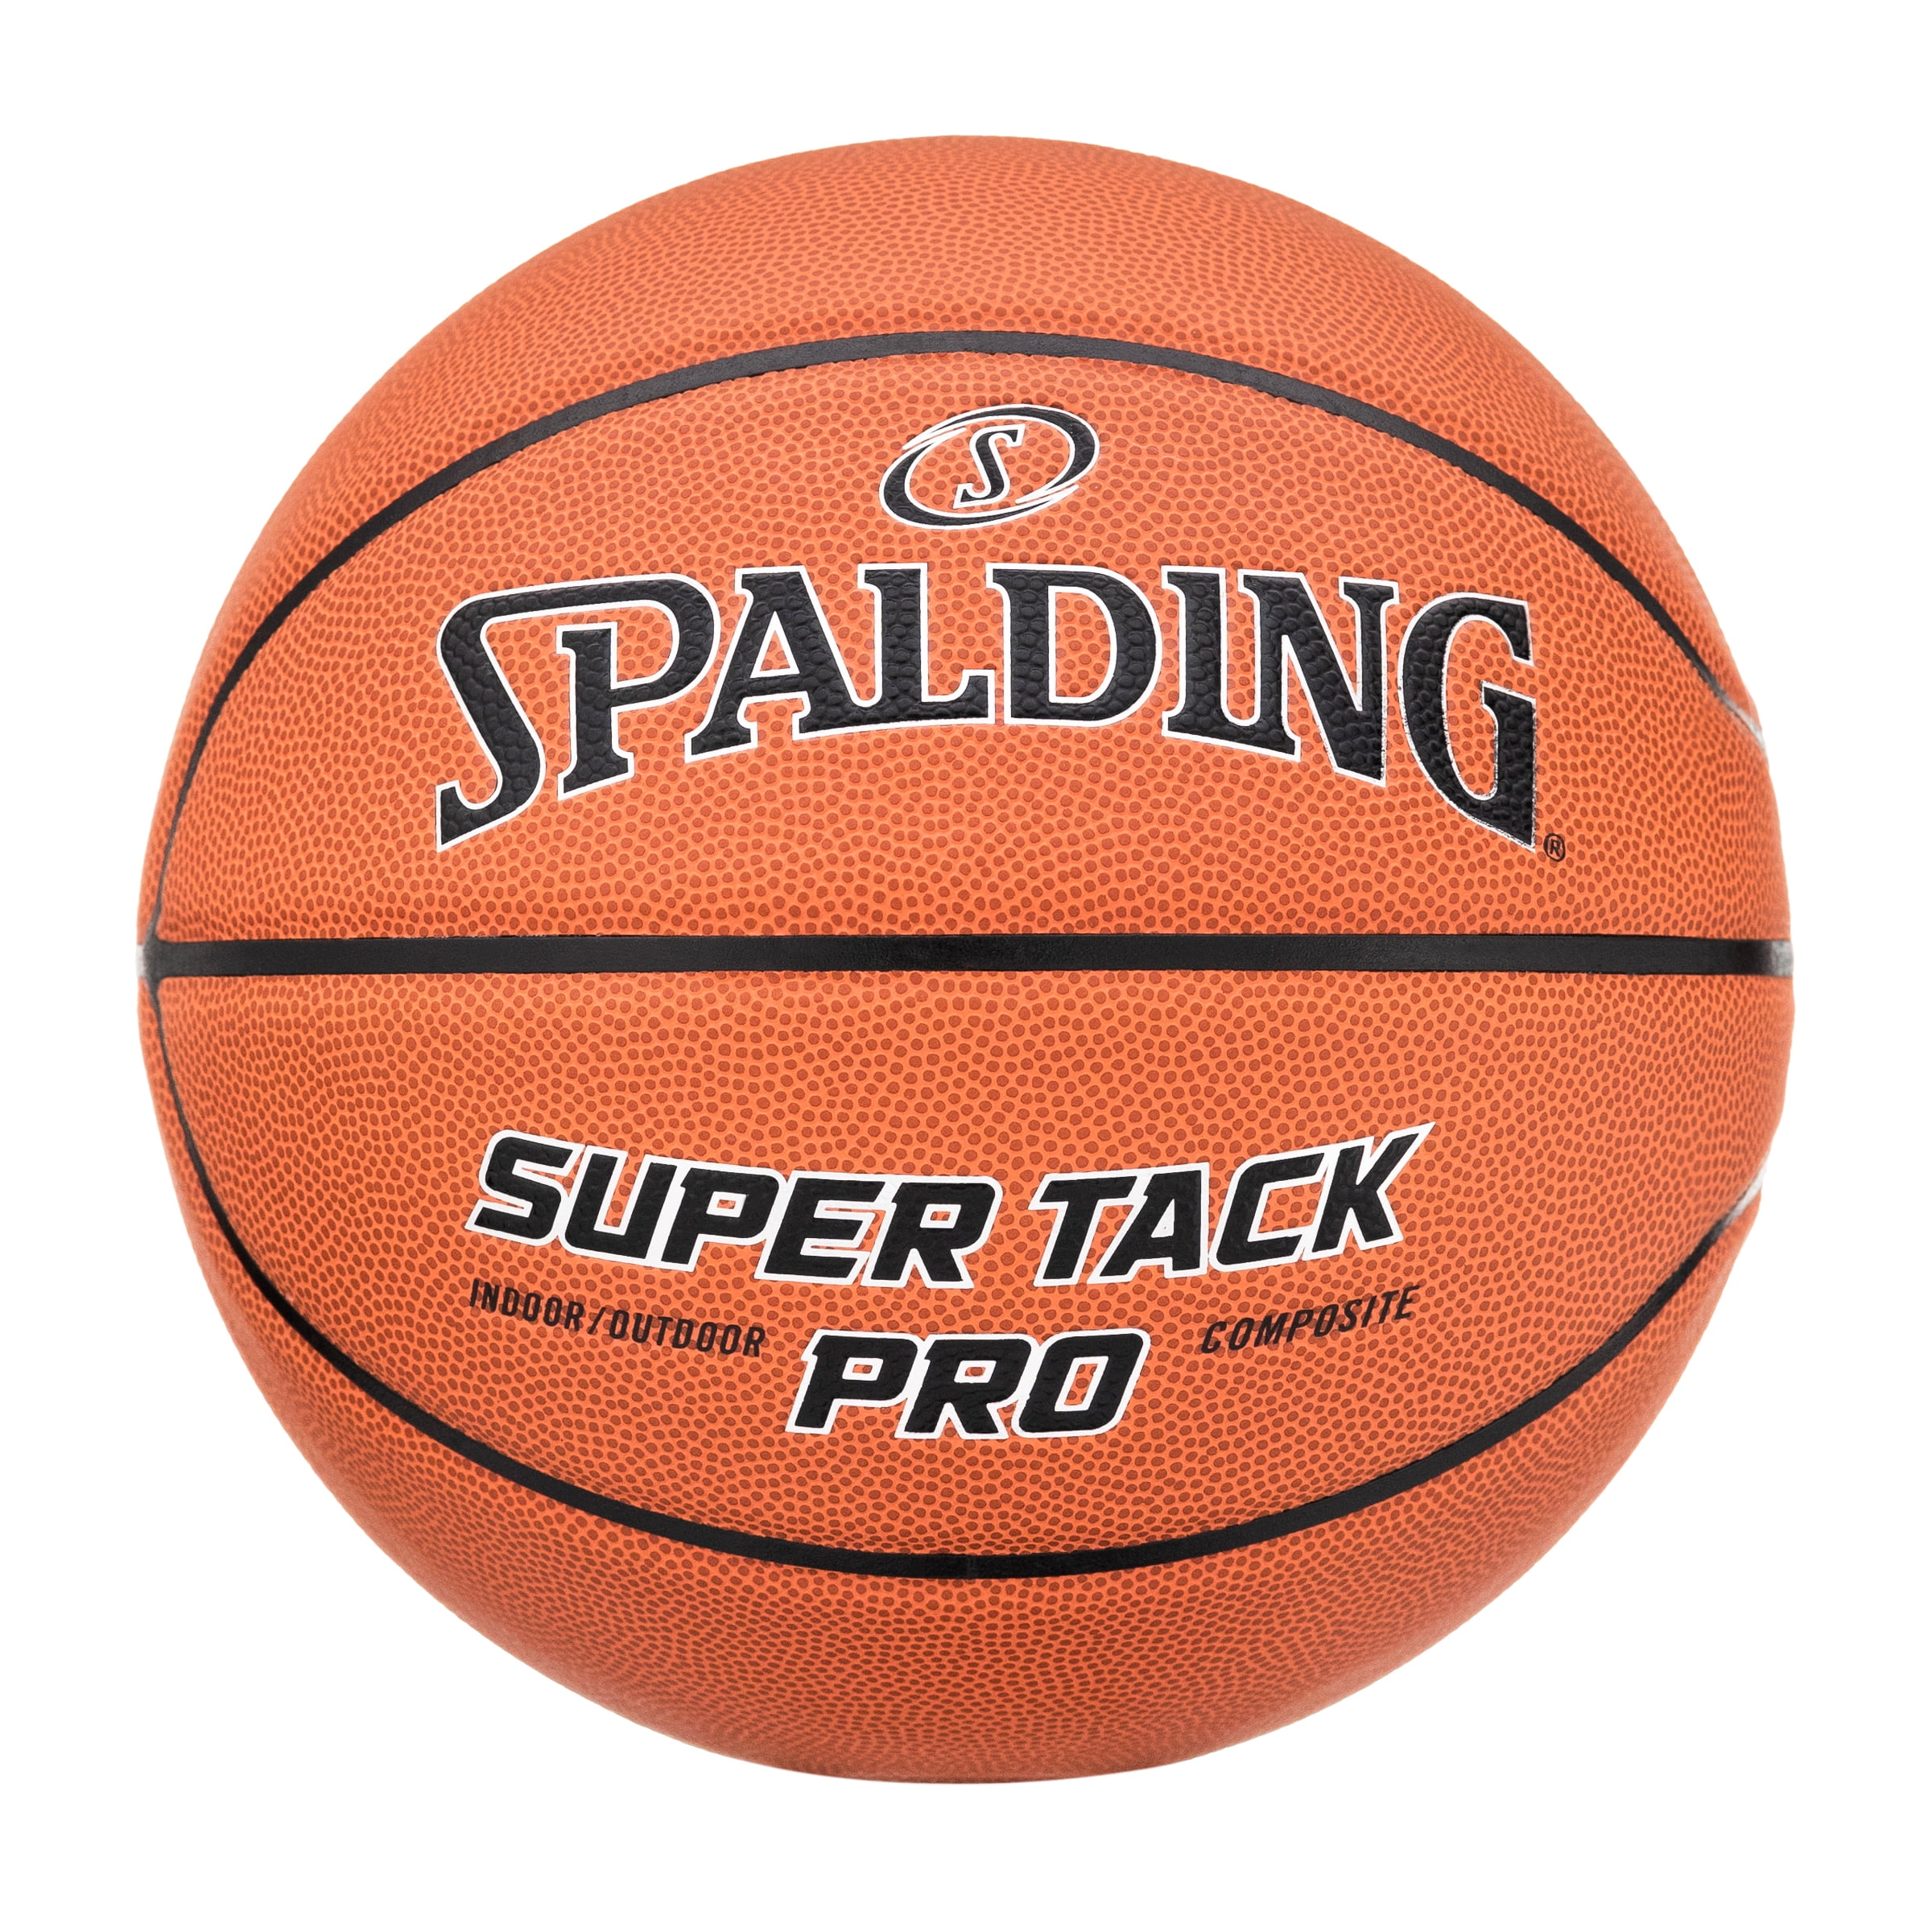 29.5" Spalding Super Tack Pro Indoor & Outdoor Basketball $14.97 + Free Shipping w/ Walmart+ or $35+